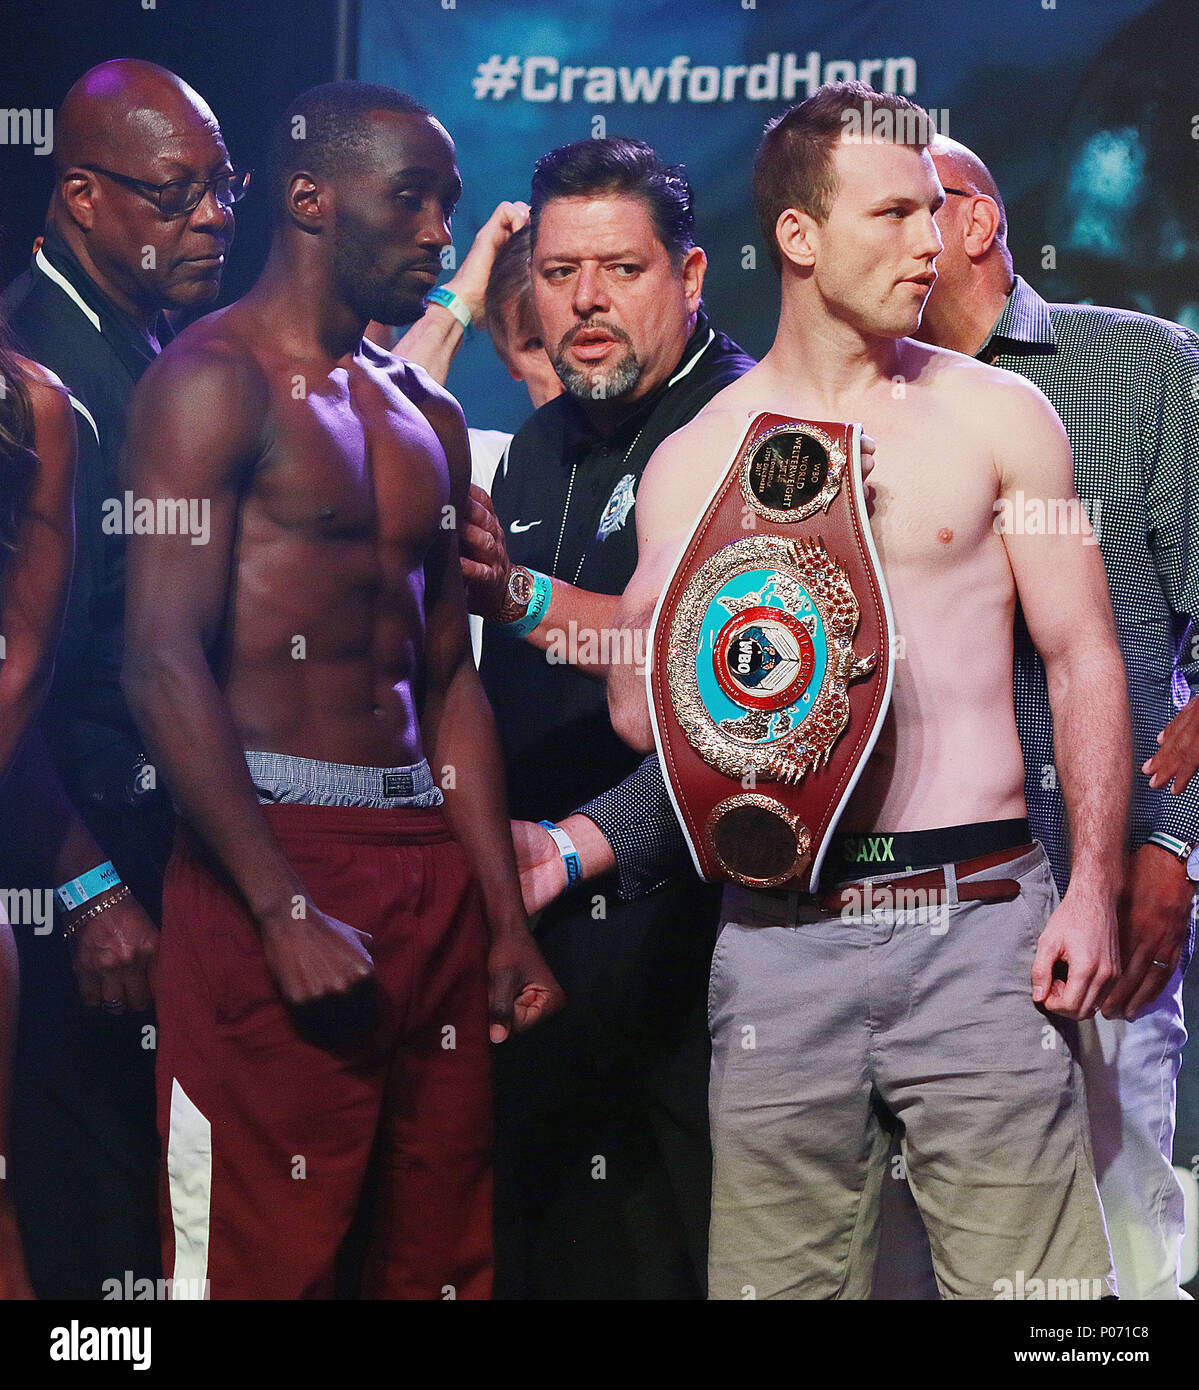 Las Vegas, Nevada, USA. 8th June, 2018. WBO Welterweight Boxing Champion Jeff Horn and undisputed Welterweight Champion Terrence Crawford square off at the weighin ceremony on June 8, 2018 for their